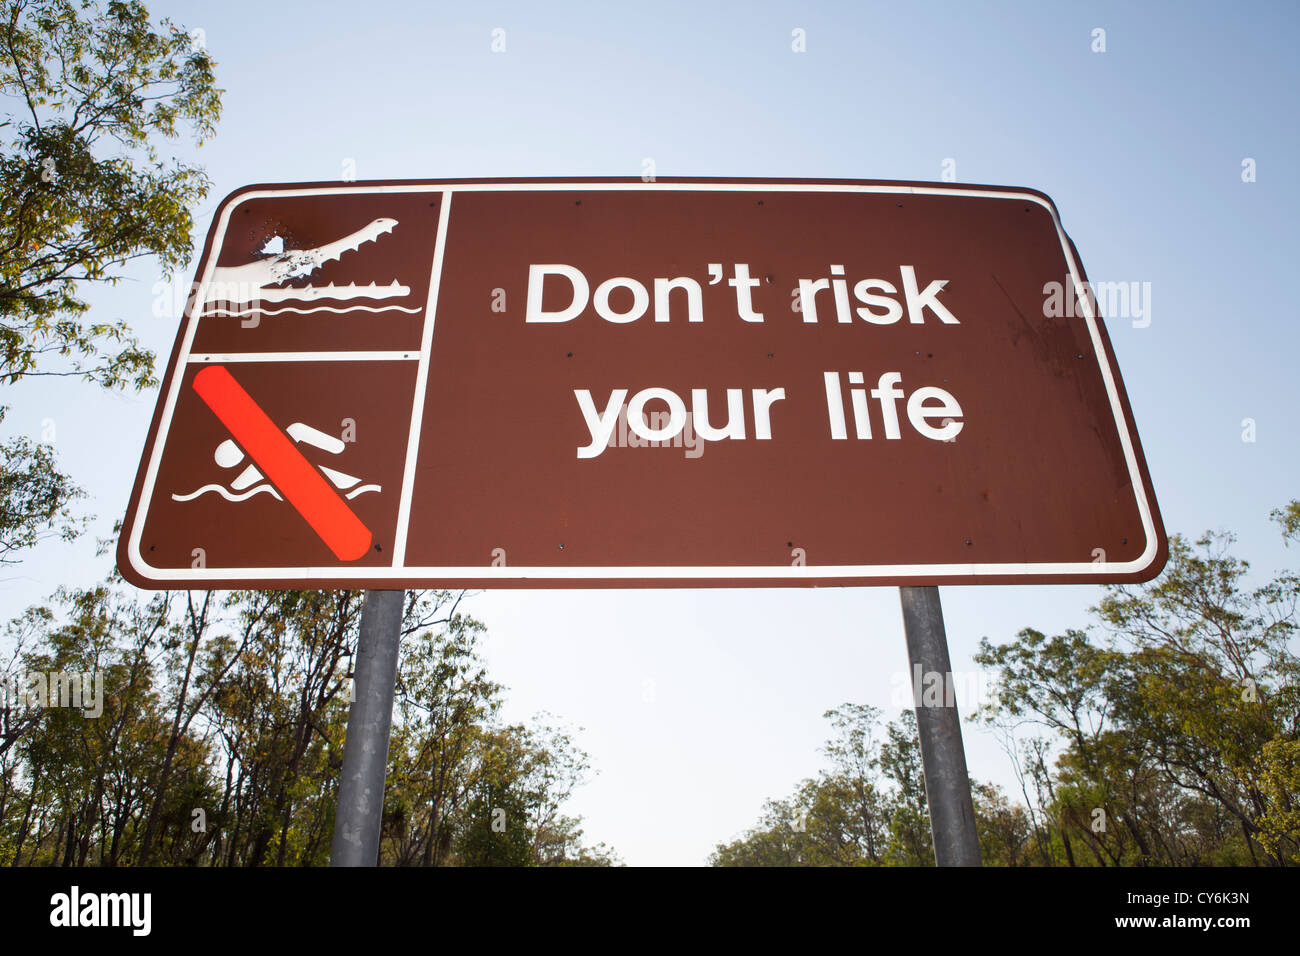 Crocodile safety warning signs in the Norther Territory of Australia. Stock Photo